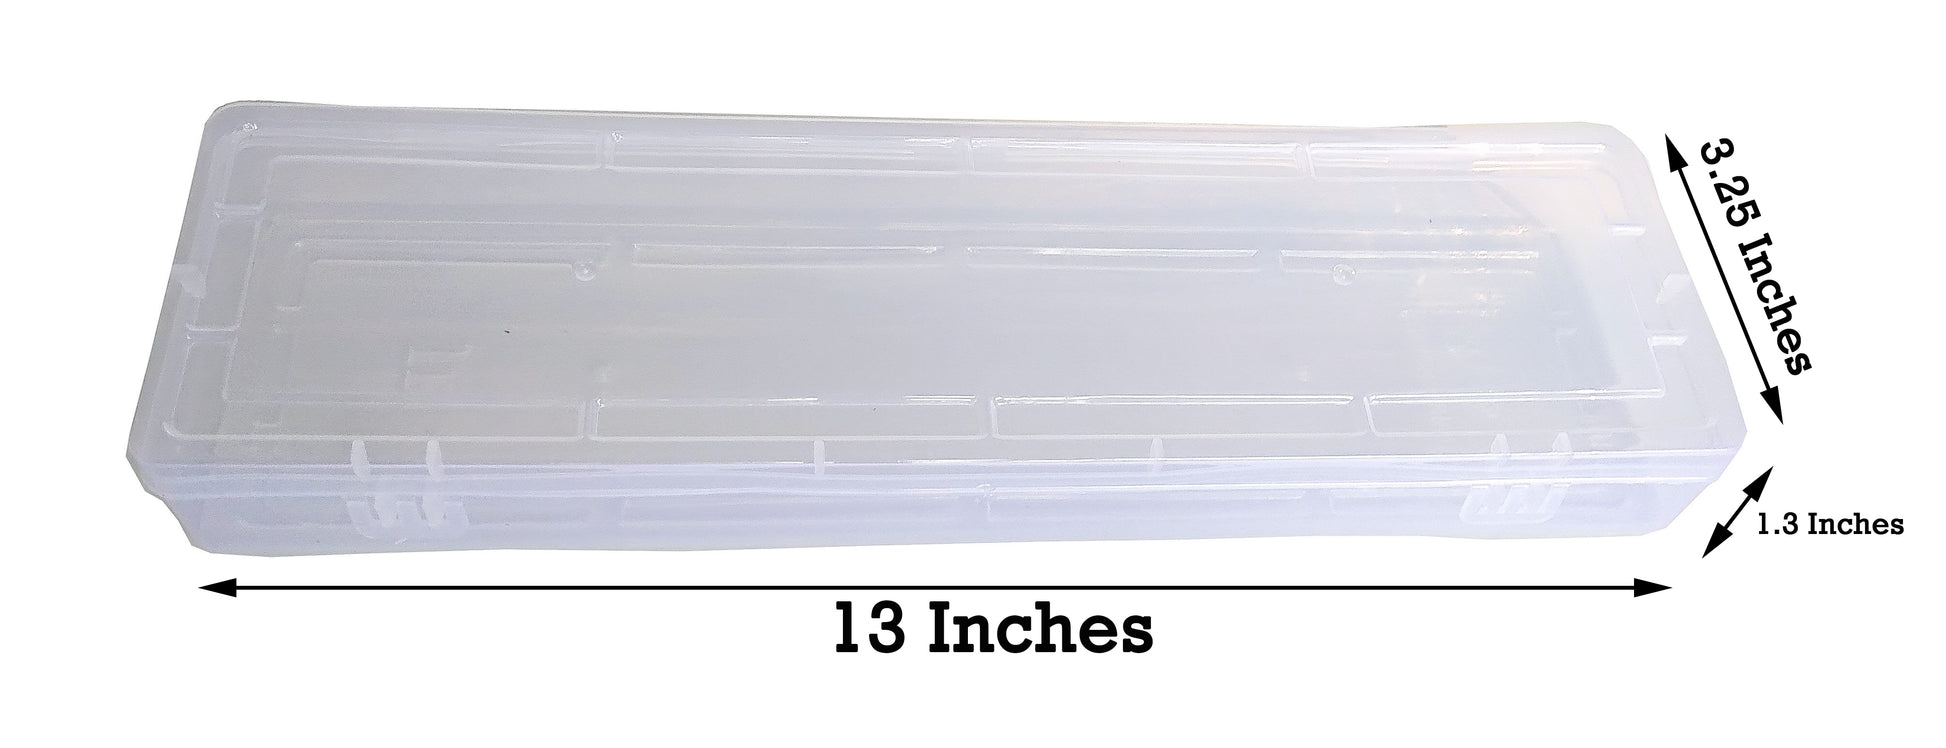 Clear Plastic Long Storage Boxes Size 13x3.25x1.3 Inches (Set of 3